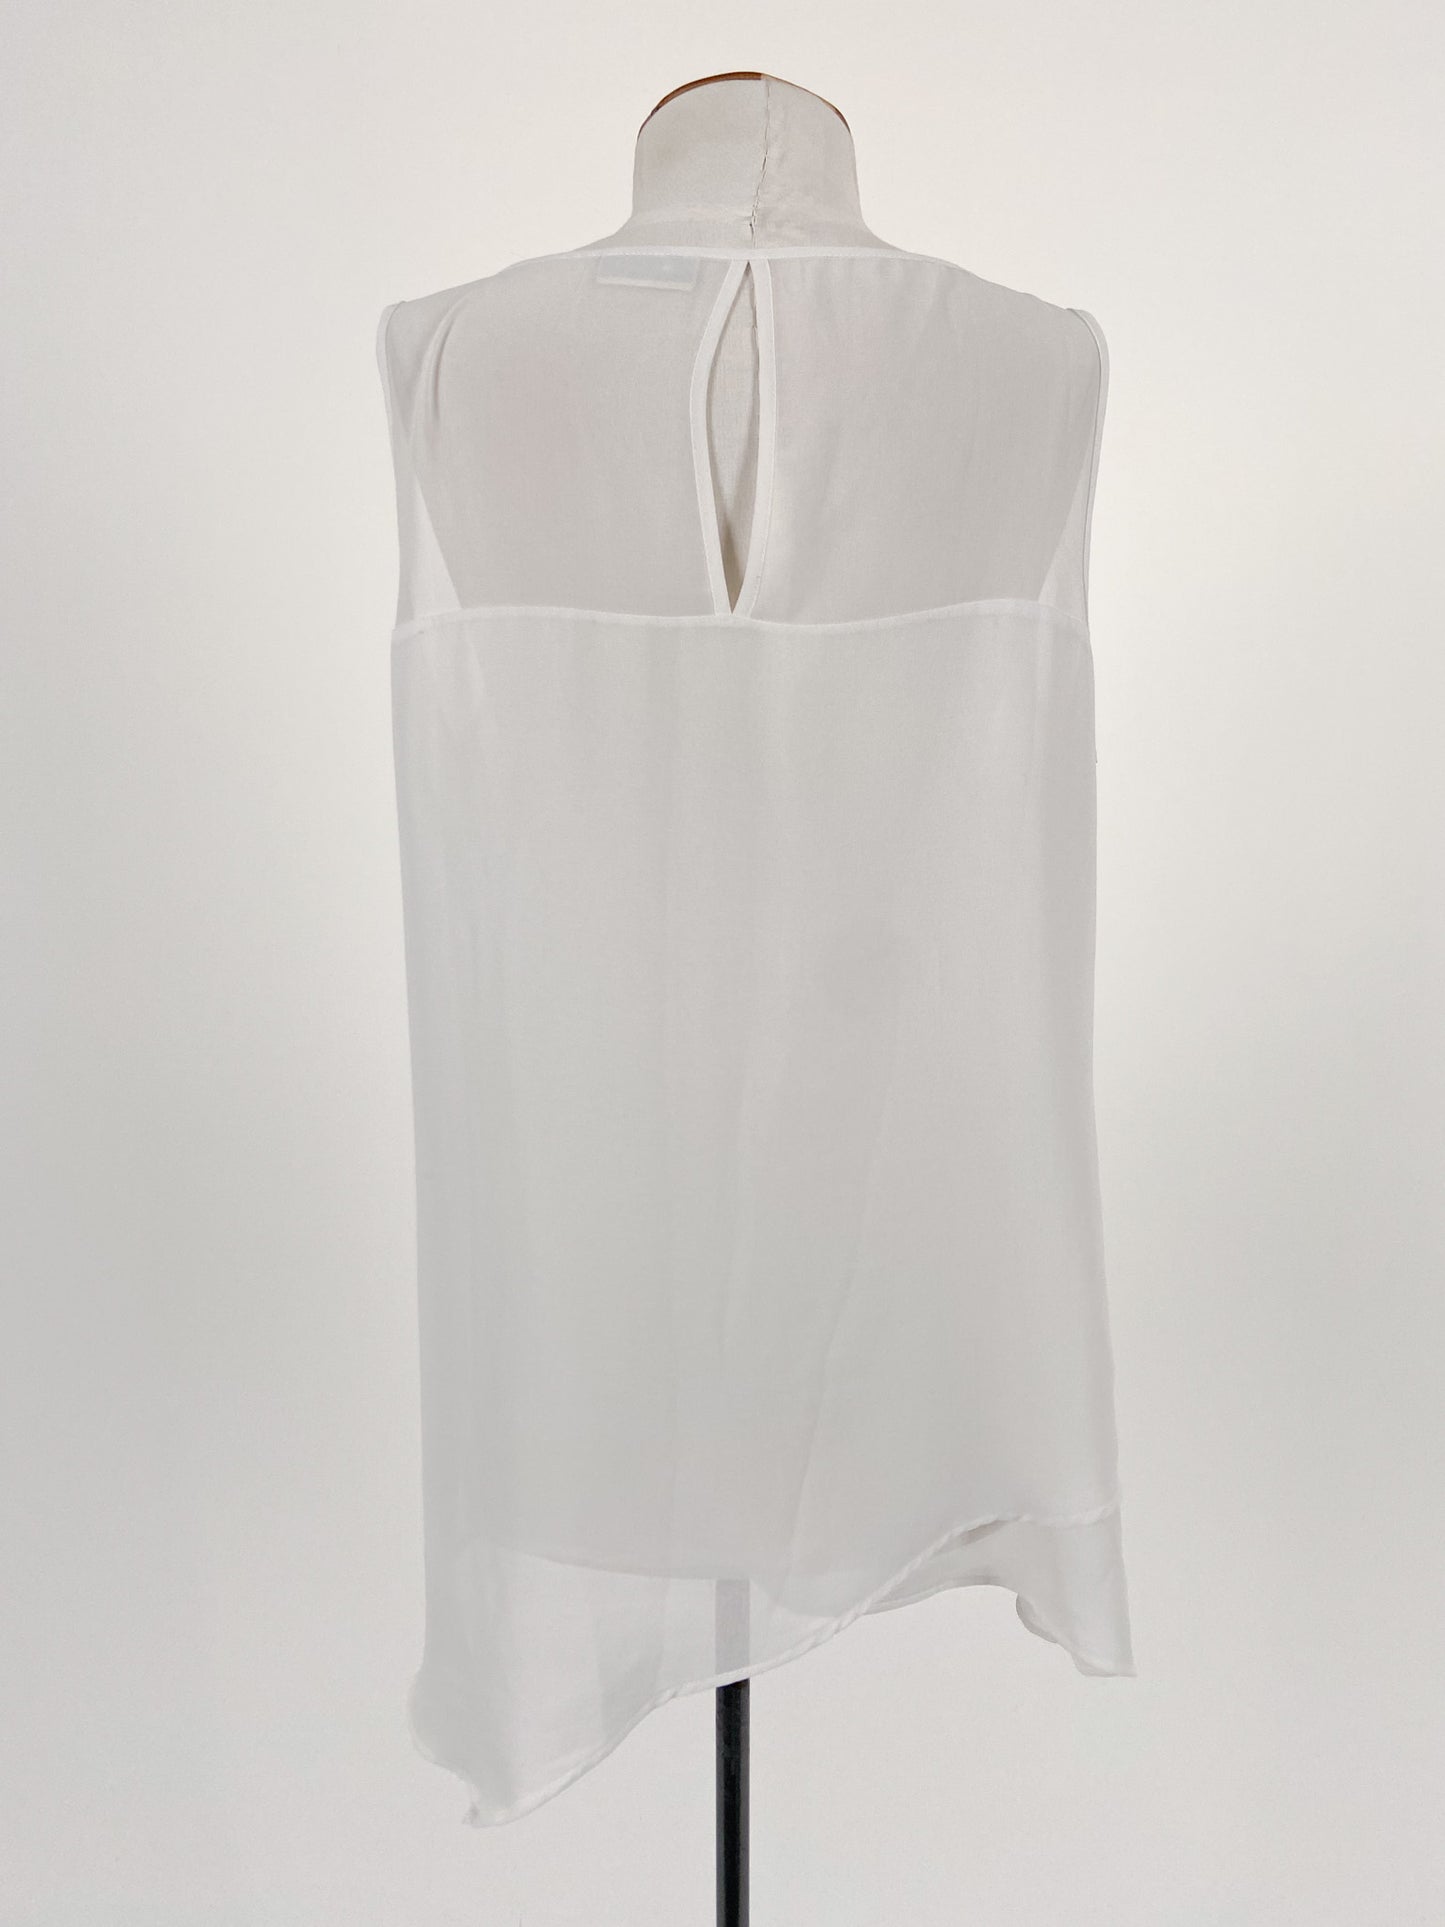 Jeanswest | White Casual/Workwear Top | Size 12